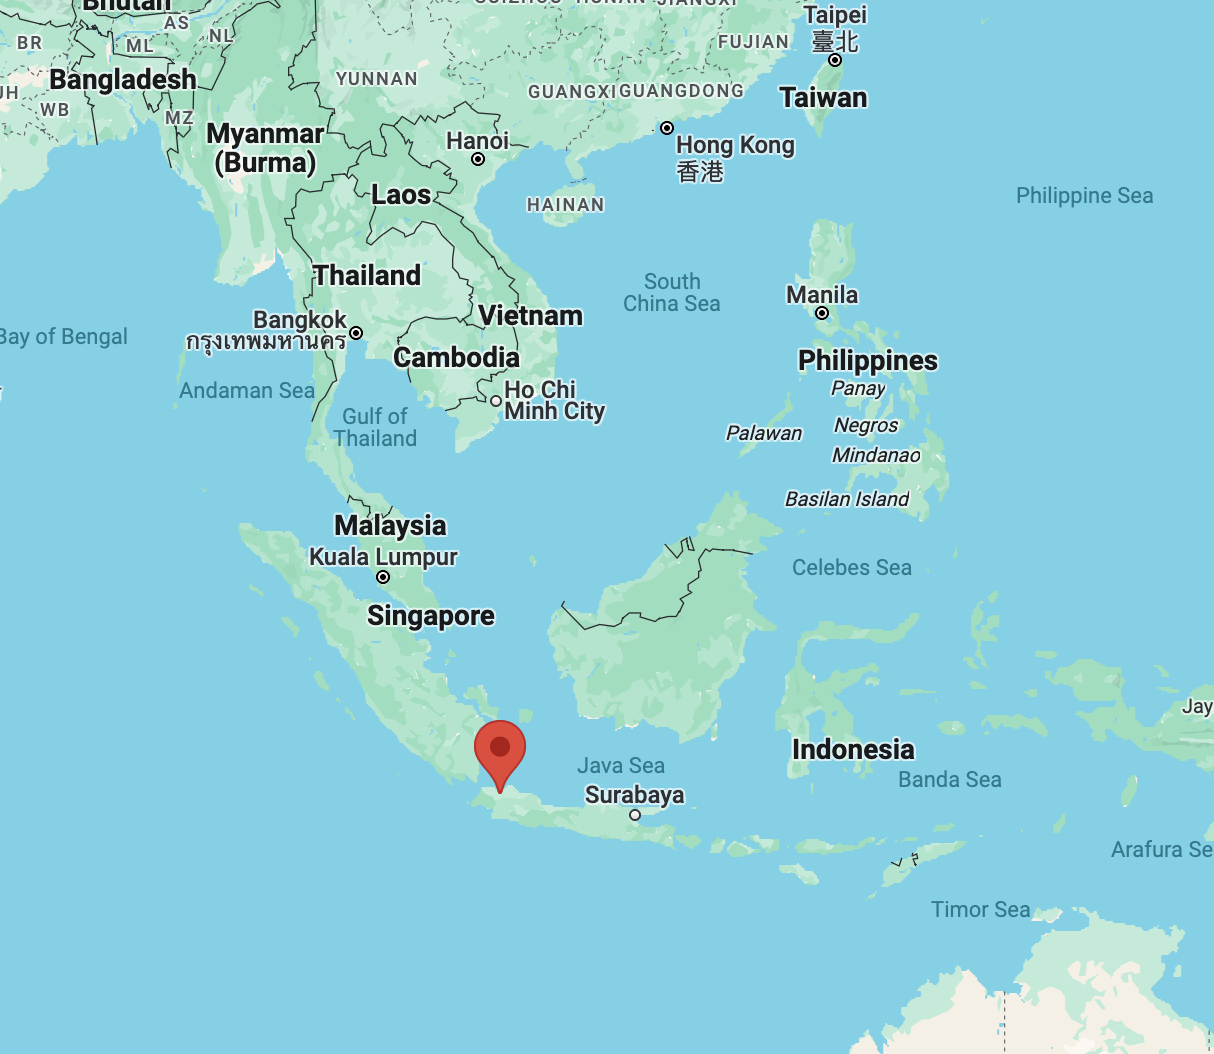 A map with a pin on the location of Jakarta, Indonesia. Indonesia is a nation consisting of many islands in between Australia, southeast Asia and the Philippines.